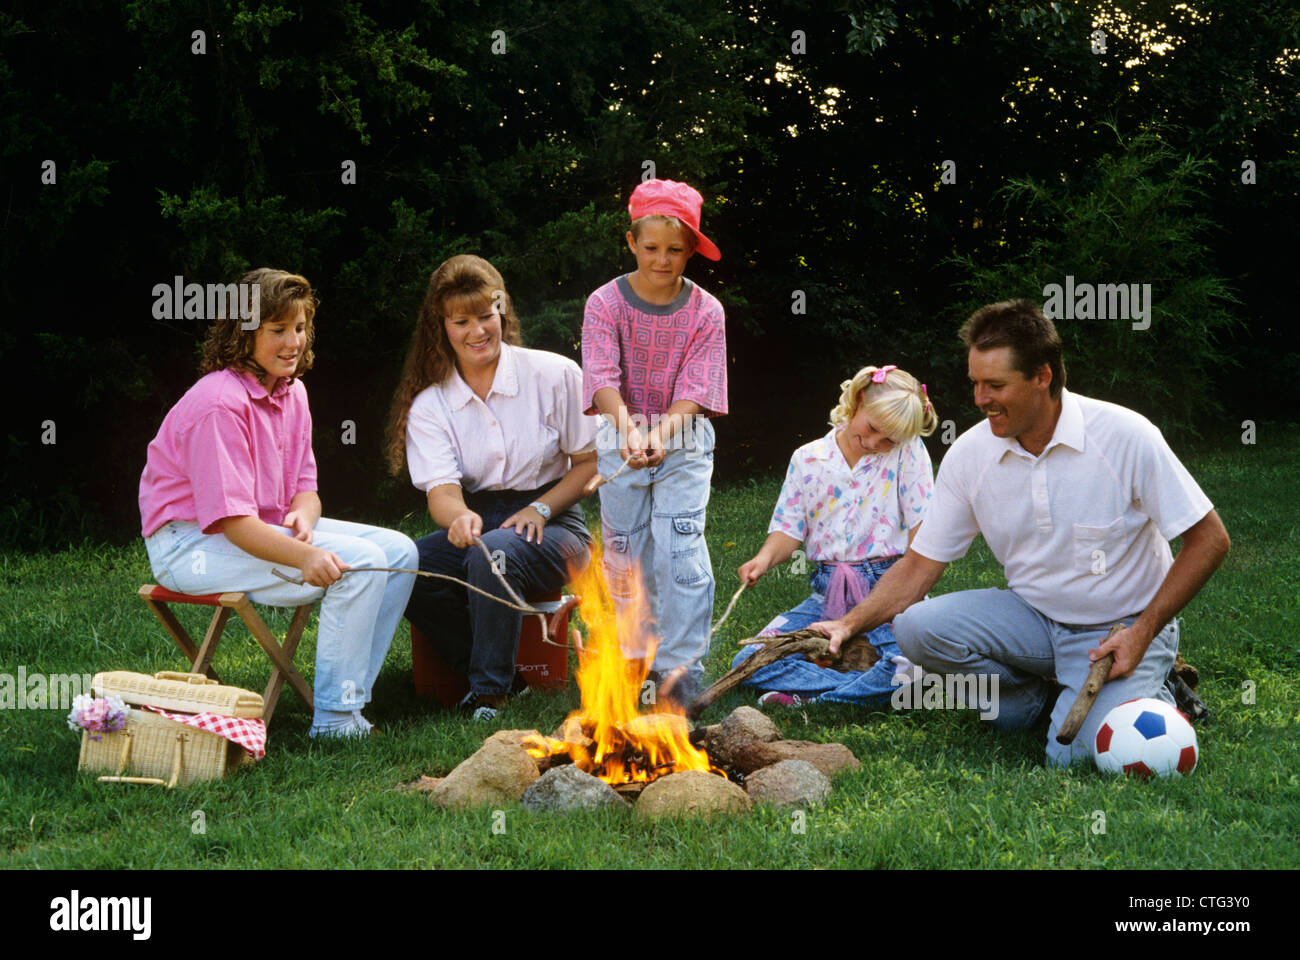 1990s FAMILY ROASTING HOT DOGS ON STICKS OVER CAMPFIRE Stock Photo